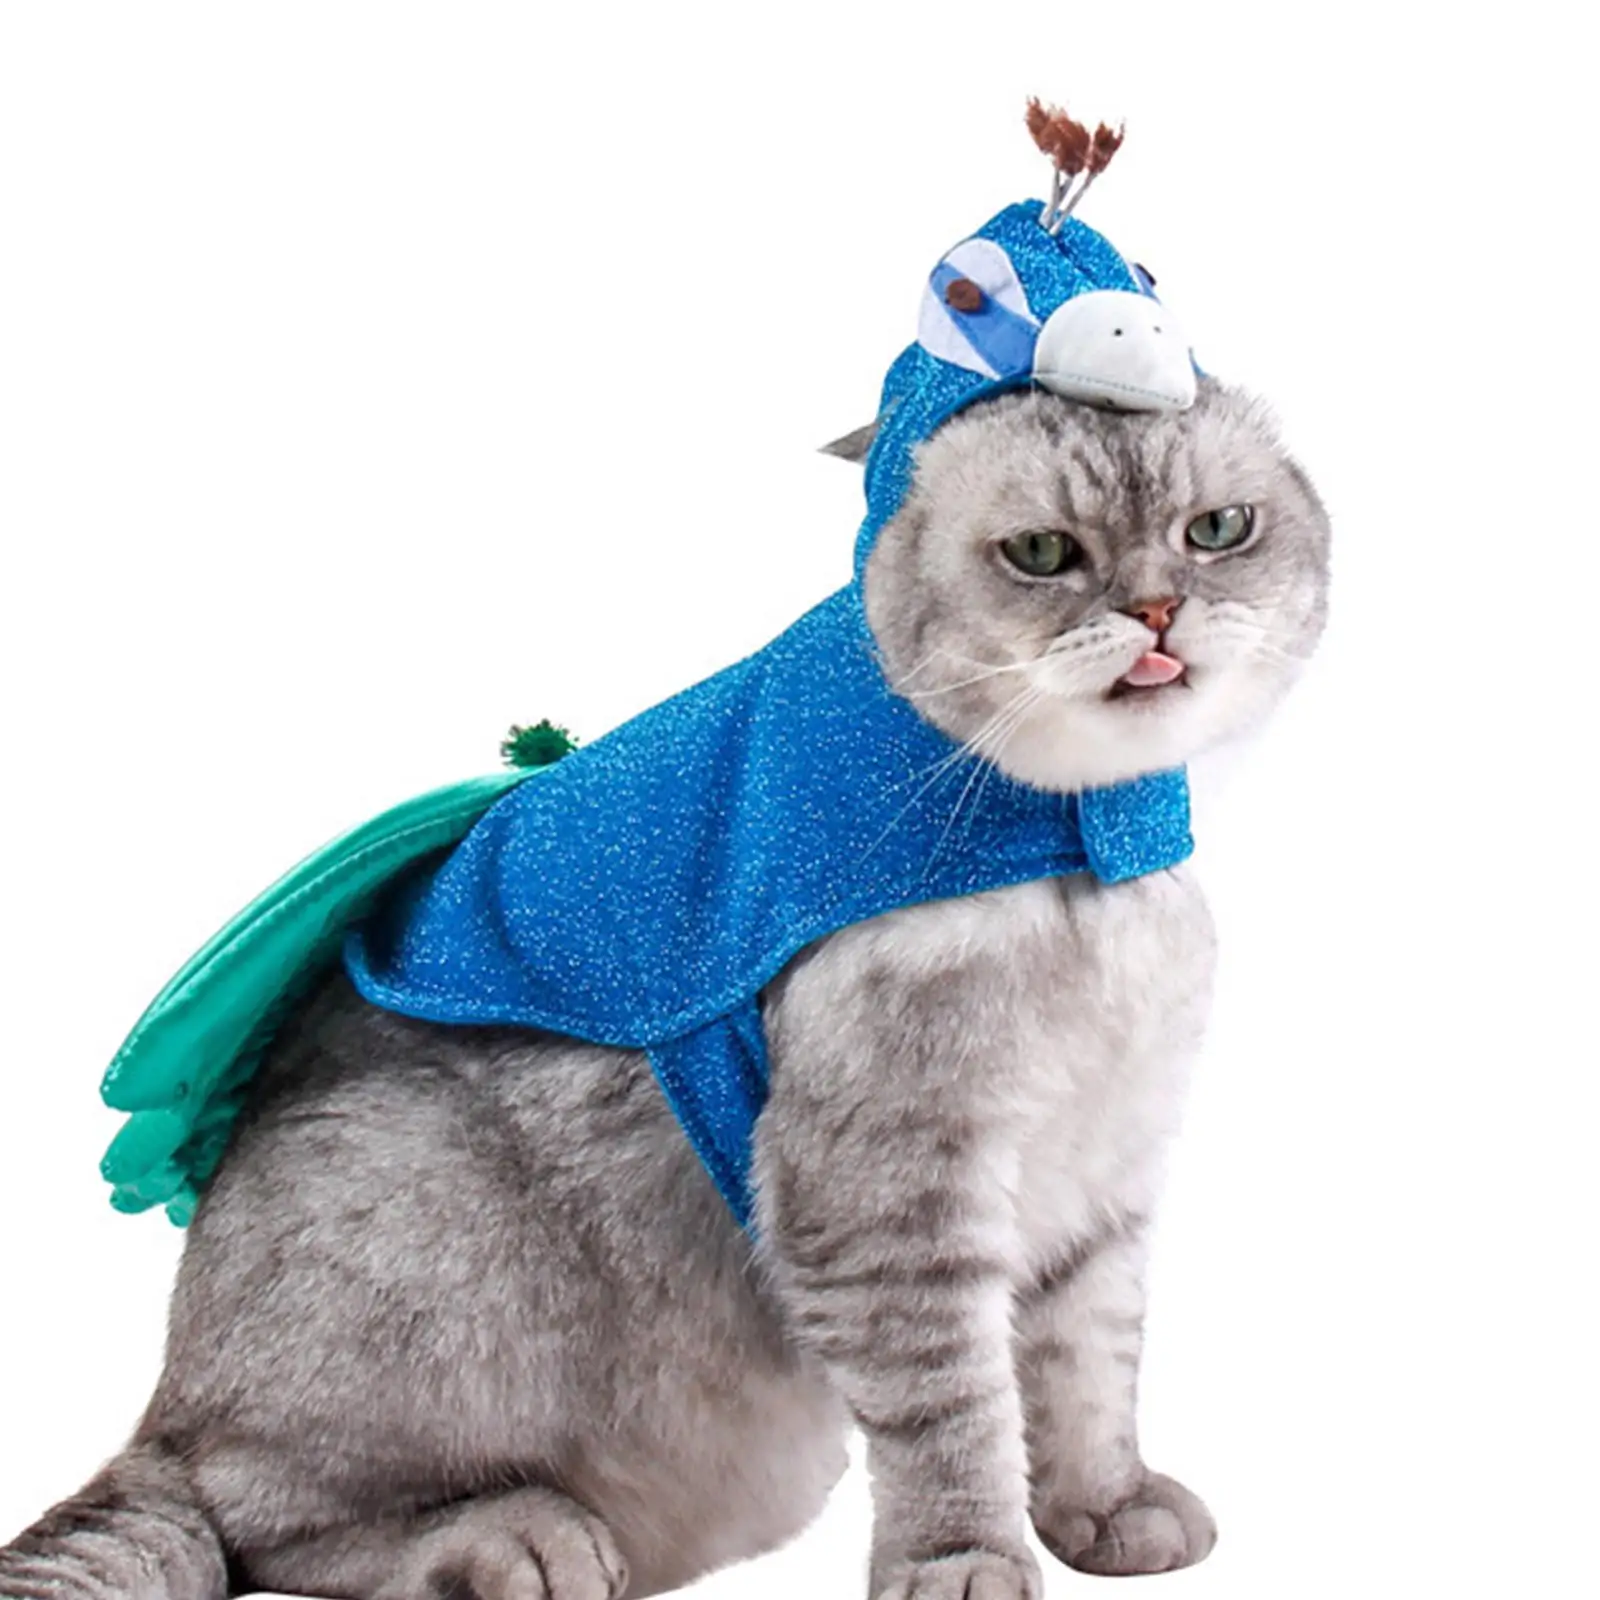 Cute Cat Peacock Costume Headwear Outfit Jacket Apparel Clothing Pet Clothes for Small Dogs Cosplay Festival Holiday Photograph